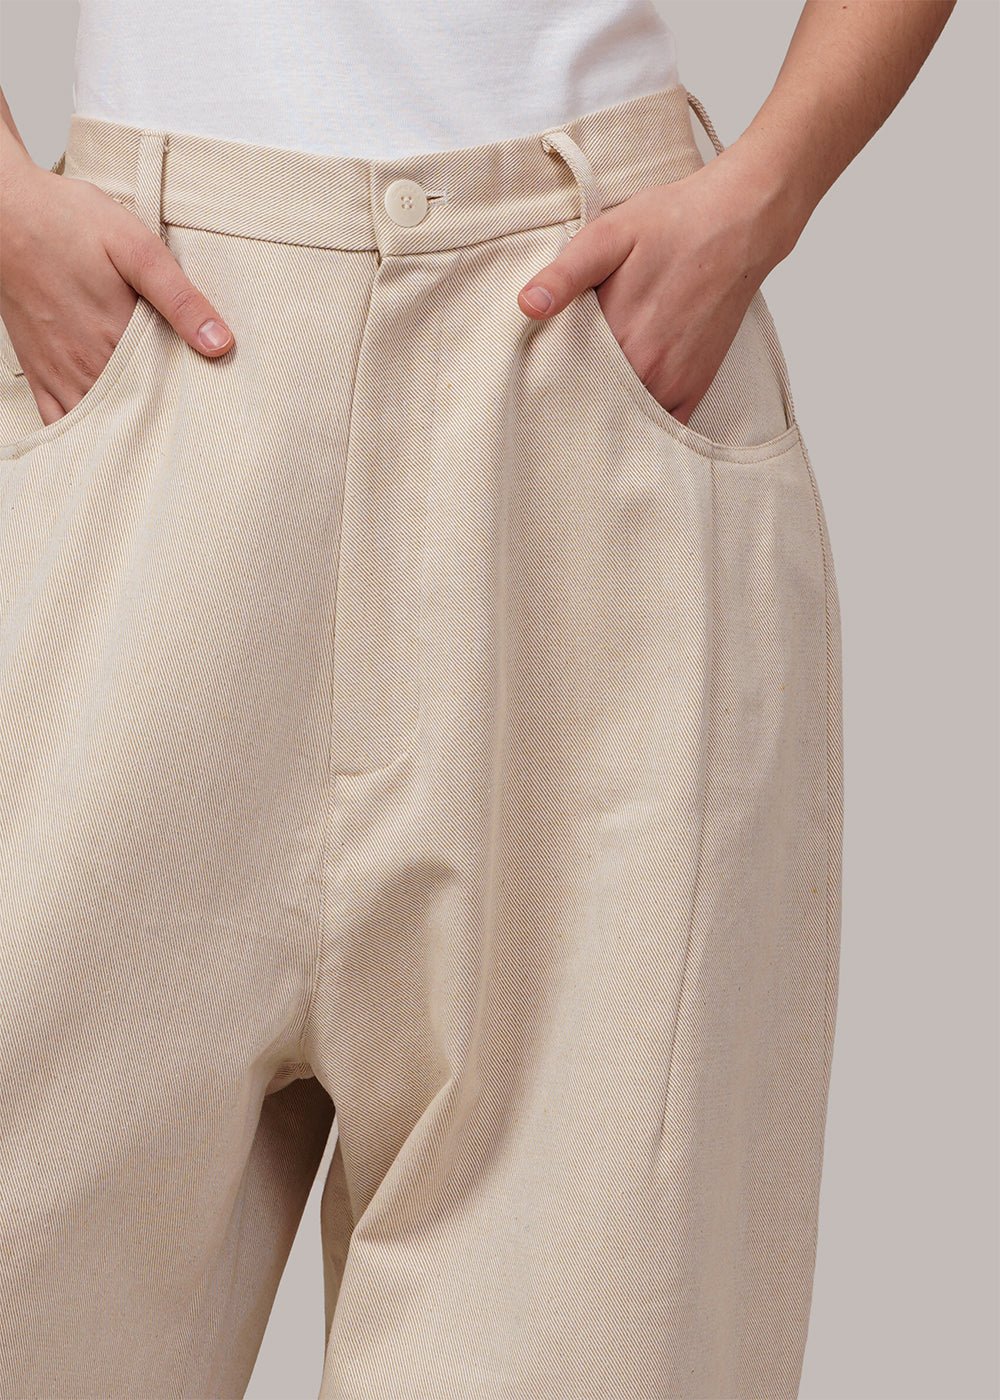 Cordera Alabaster Baggy Pants - New Classics Studios Sustainable Ethical Fashion Canada